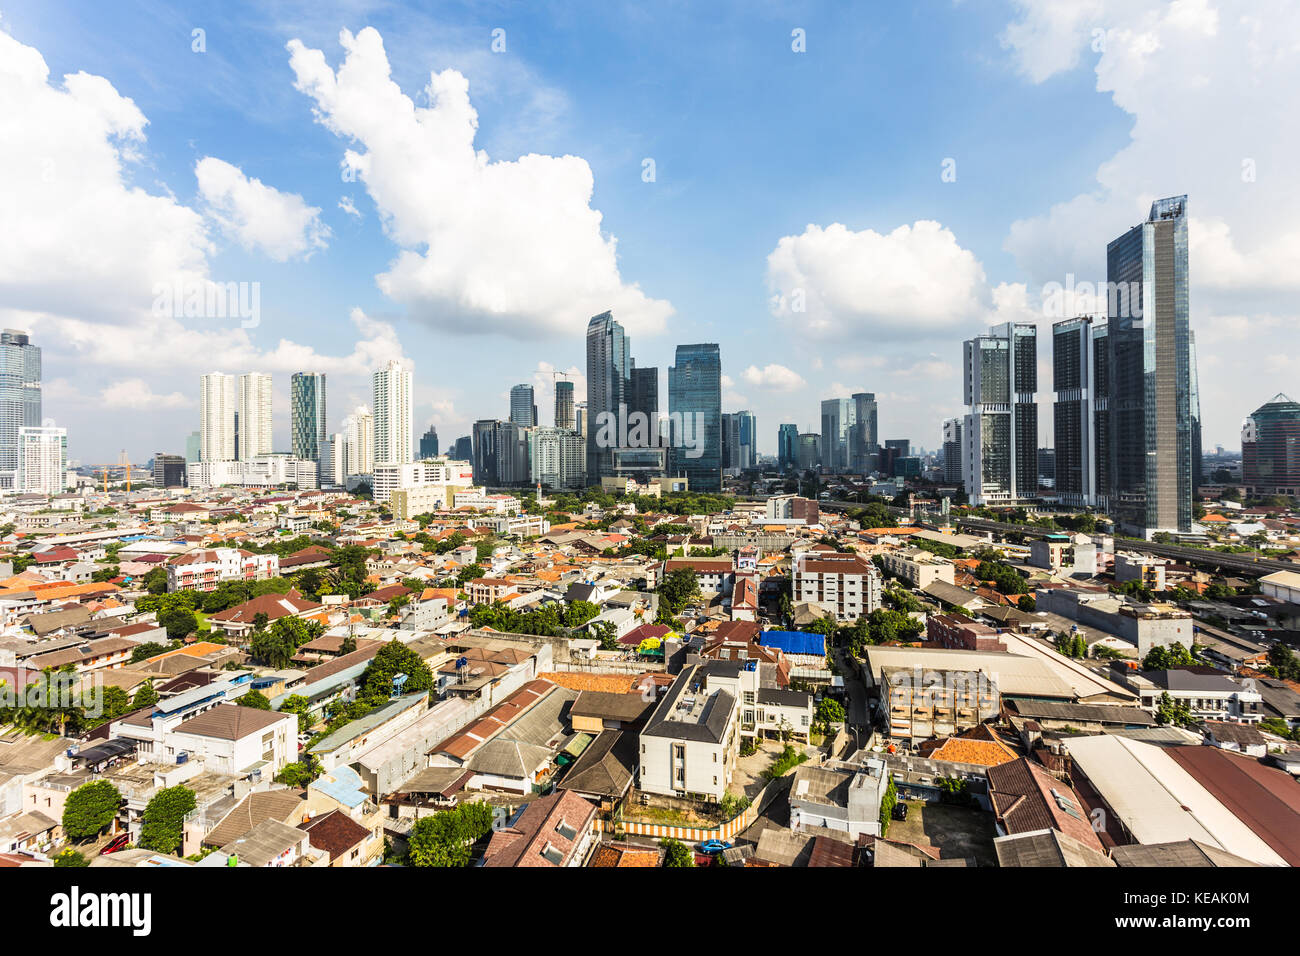 Jakarta skyline on a sunny day in Indonesia capital city in Southeast Asia. Stock Photo